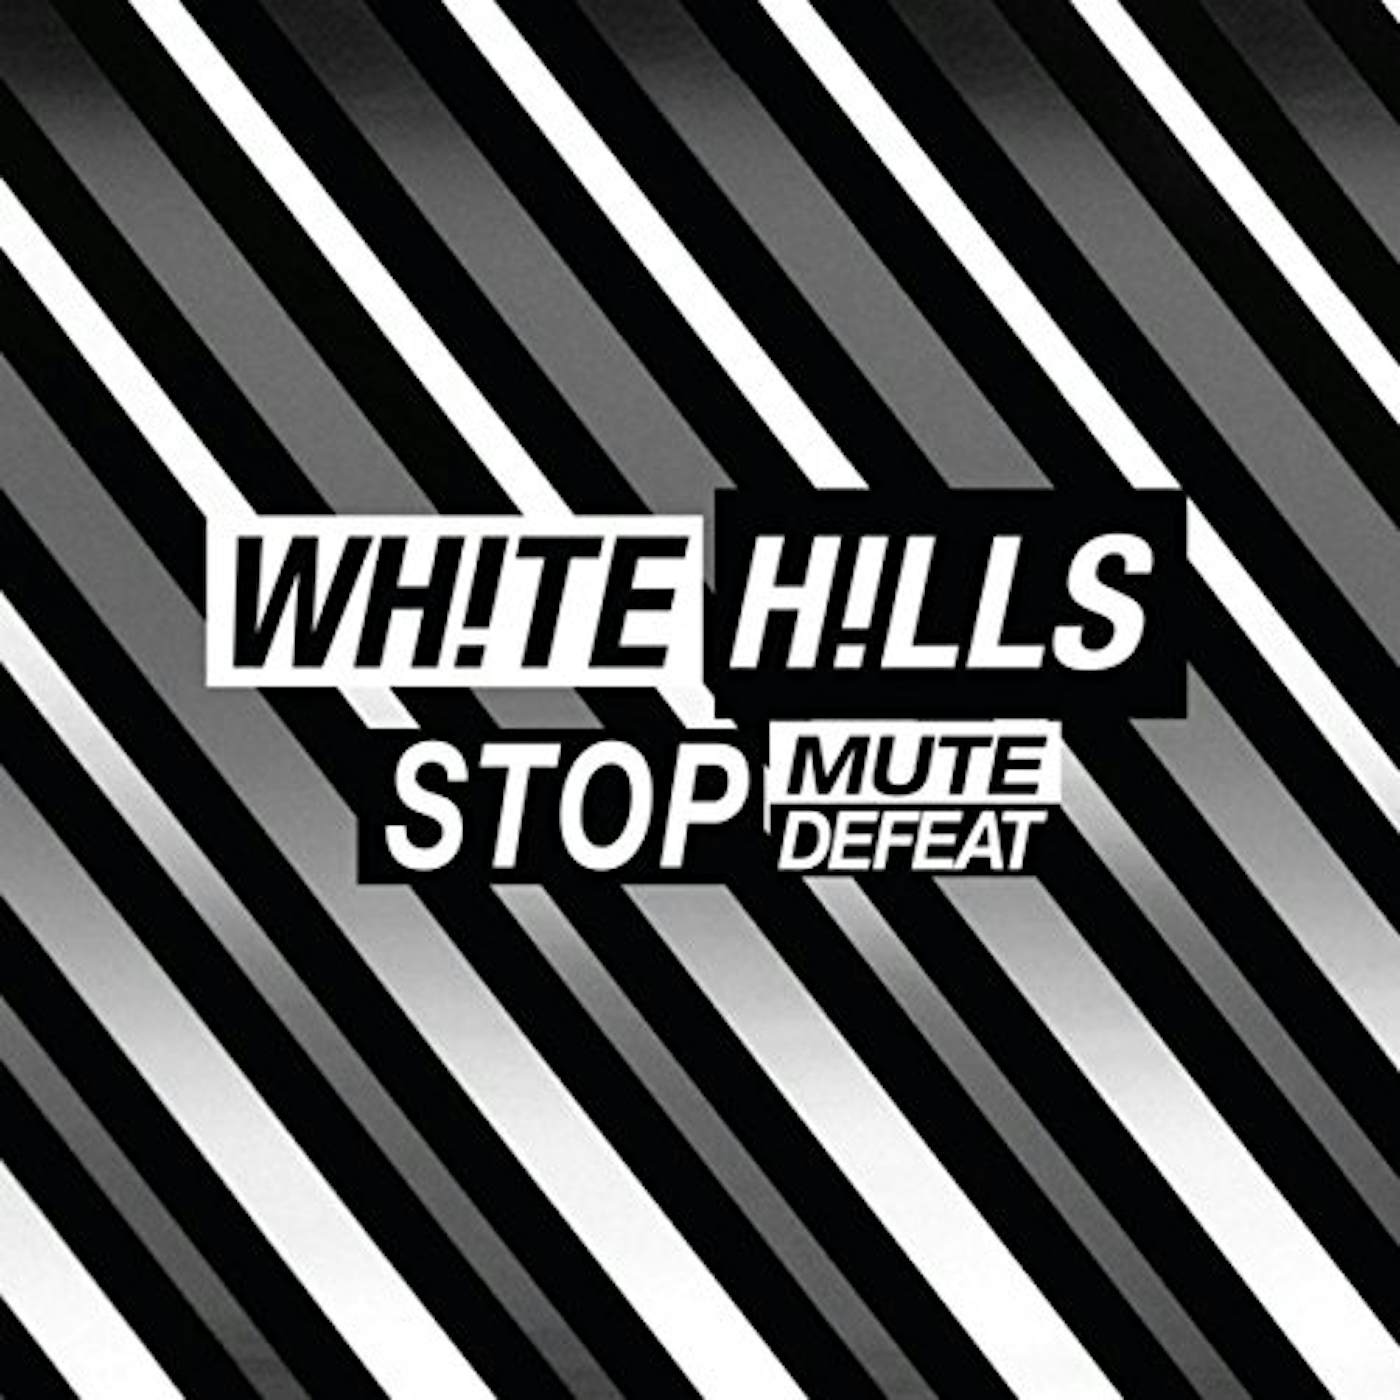 White Hills STOP MUTE DEFEAT CD